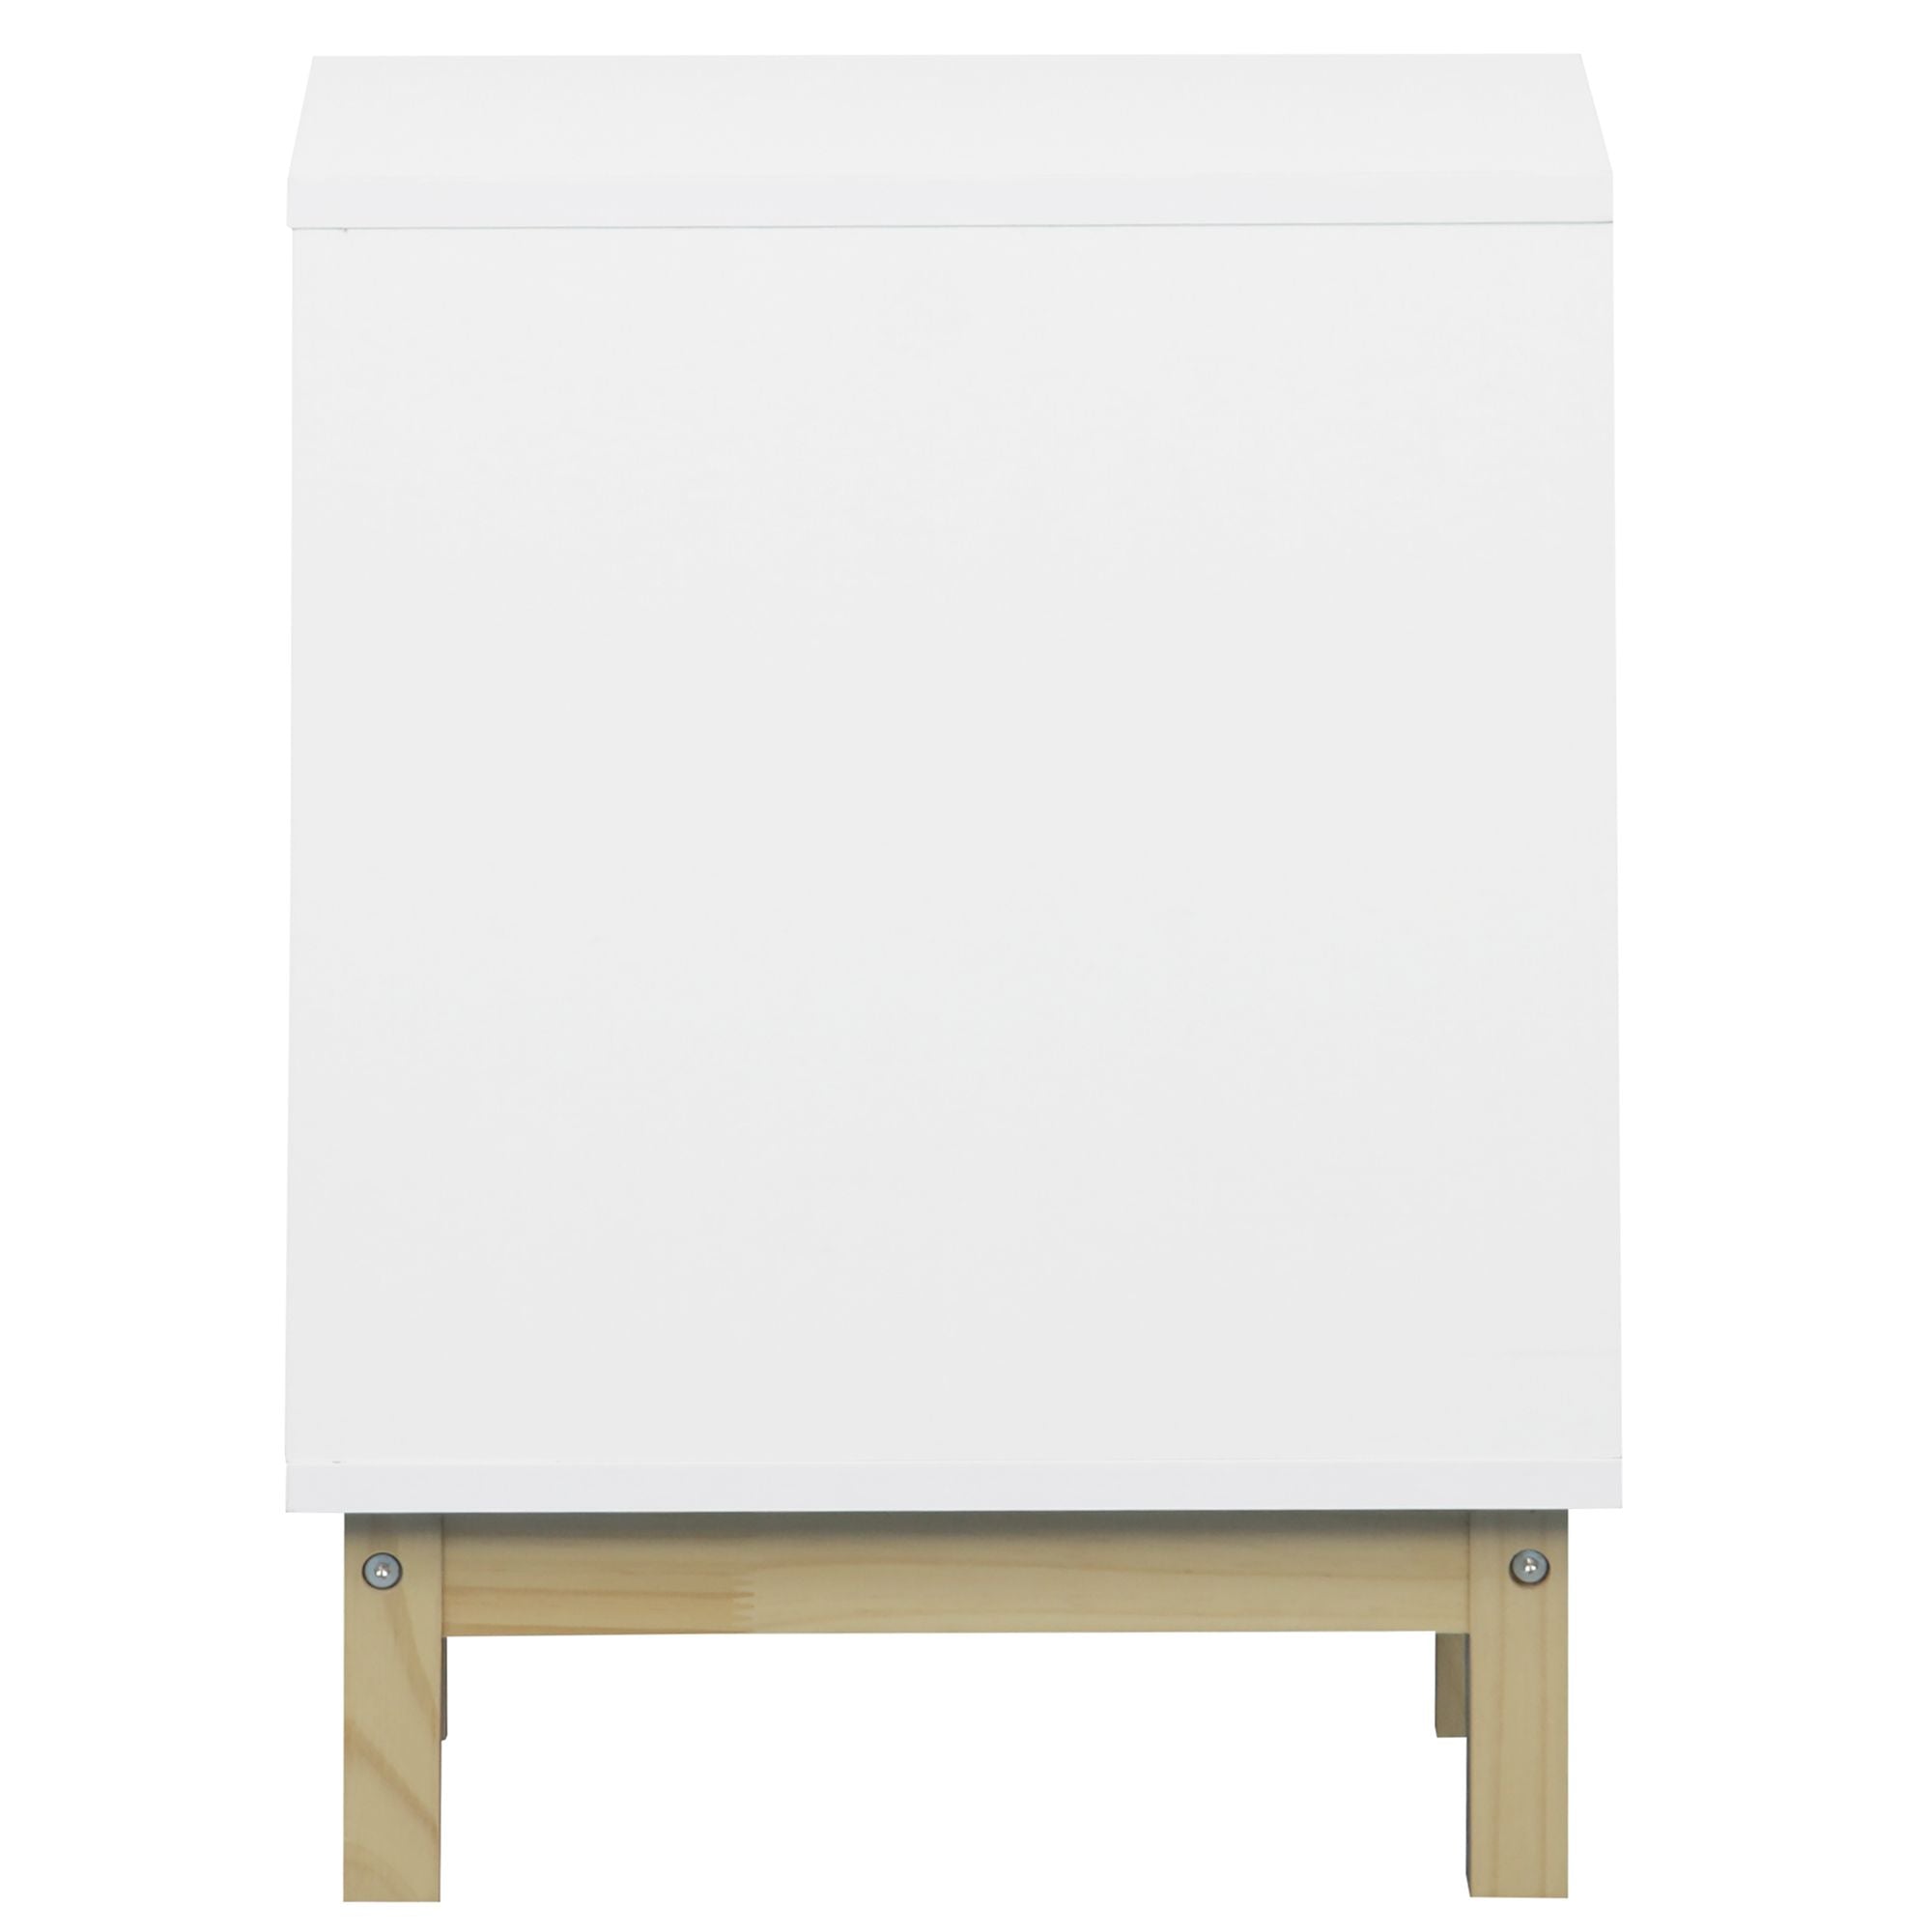 Image shows Scandinavian Bedside Table from side profile